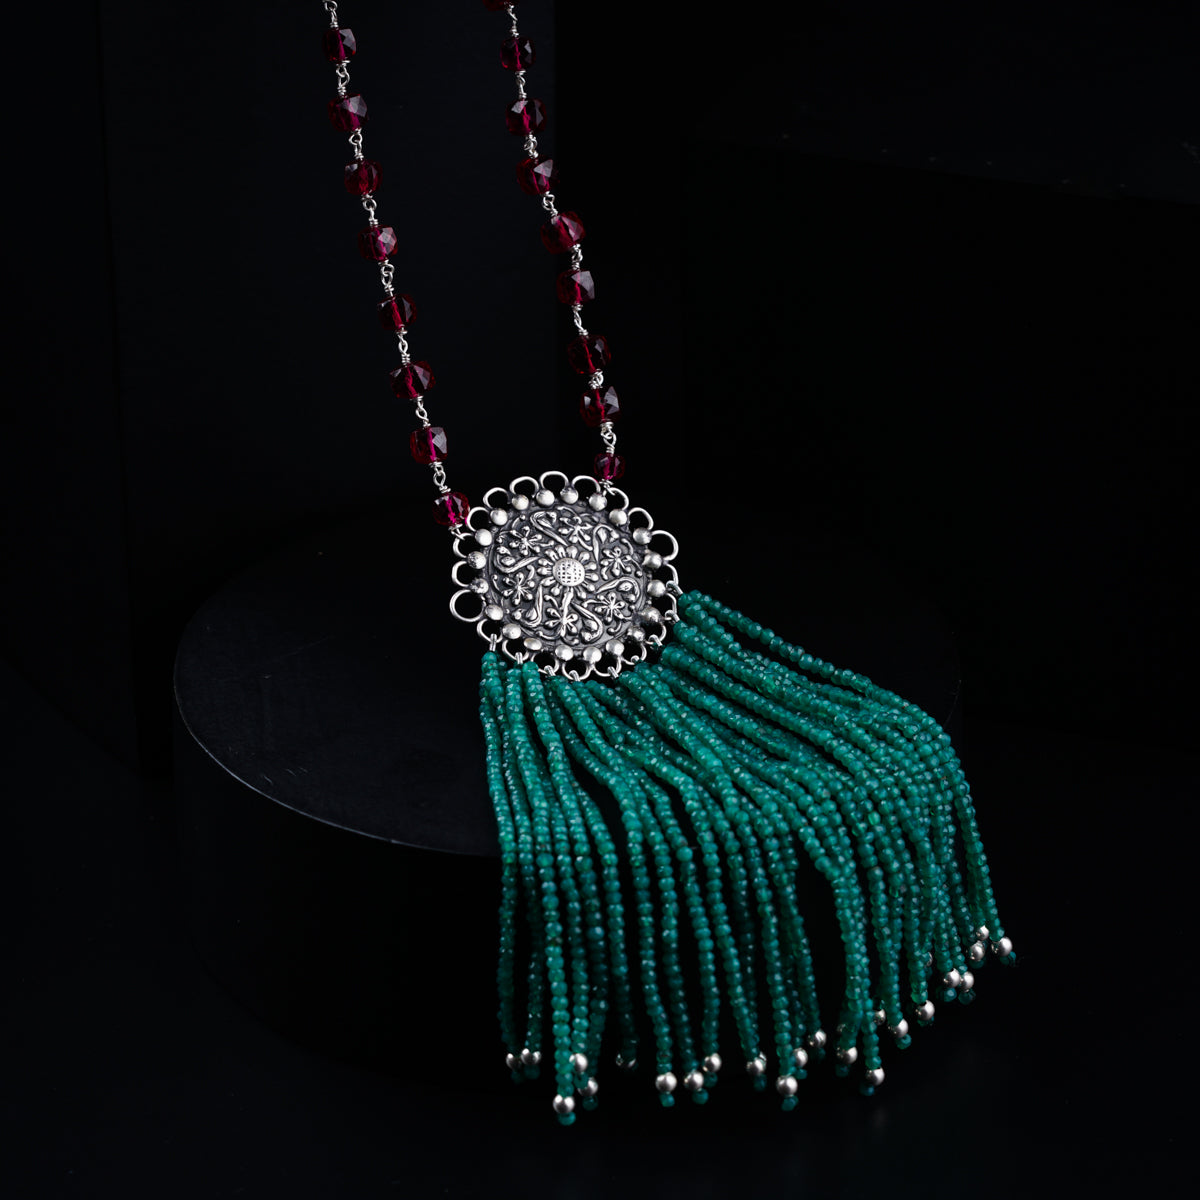 a necklace with beads and a tassel